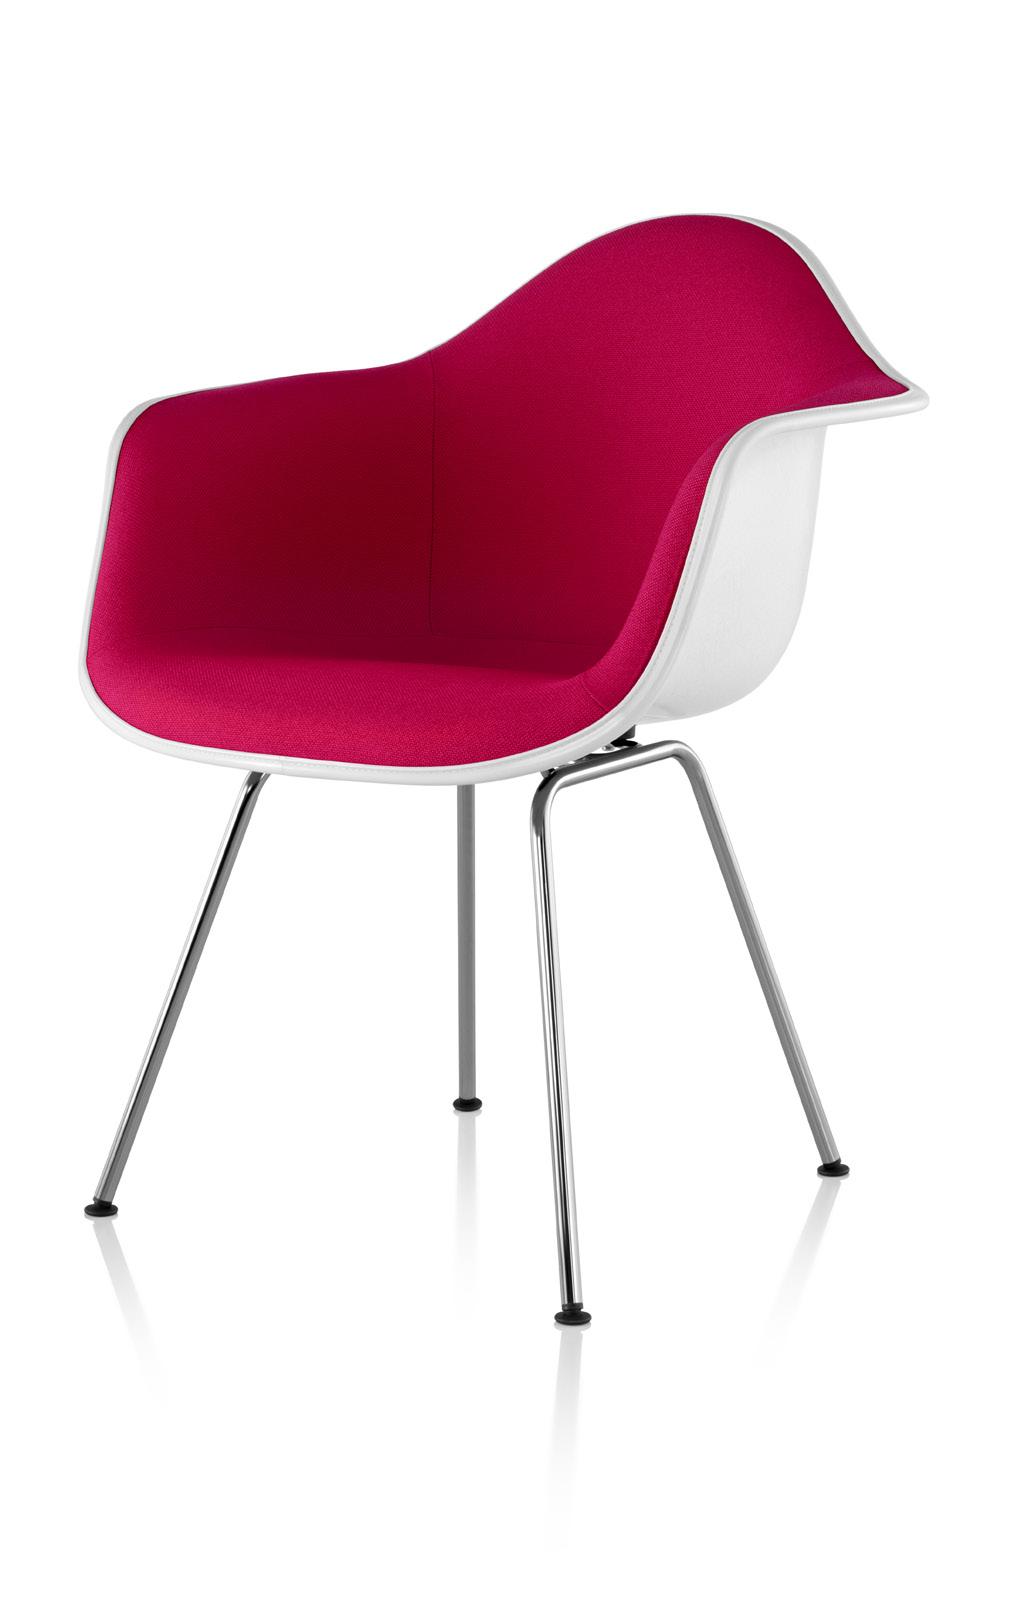 Eames Upholstered Molded Plastic Armchair 4-Leg Base 14% recycled content; 86% recyclable The sleek lines and organic shape of this enduring chair by Charles and Ray Eames epitomize their